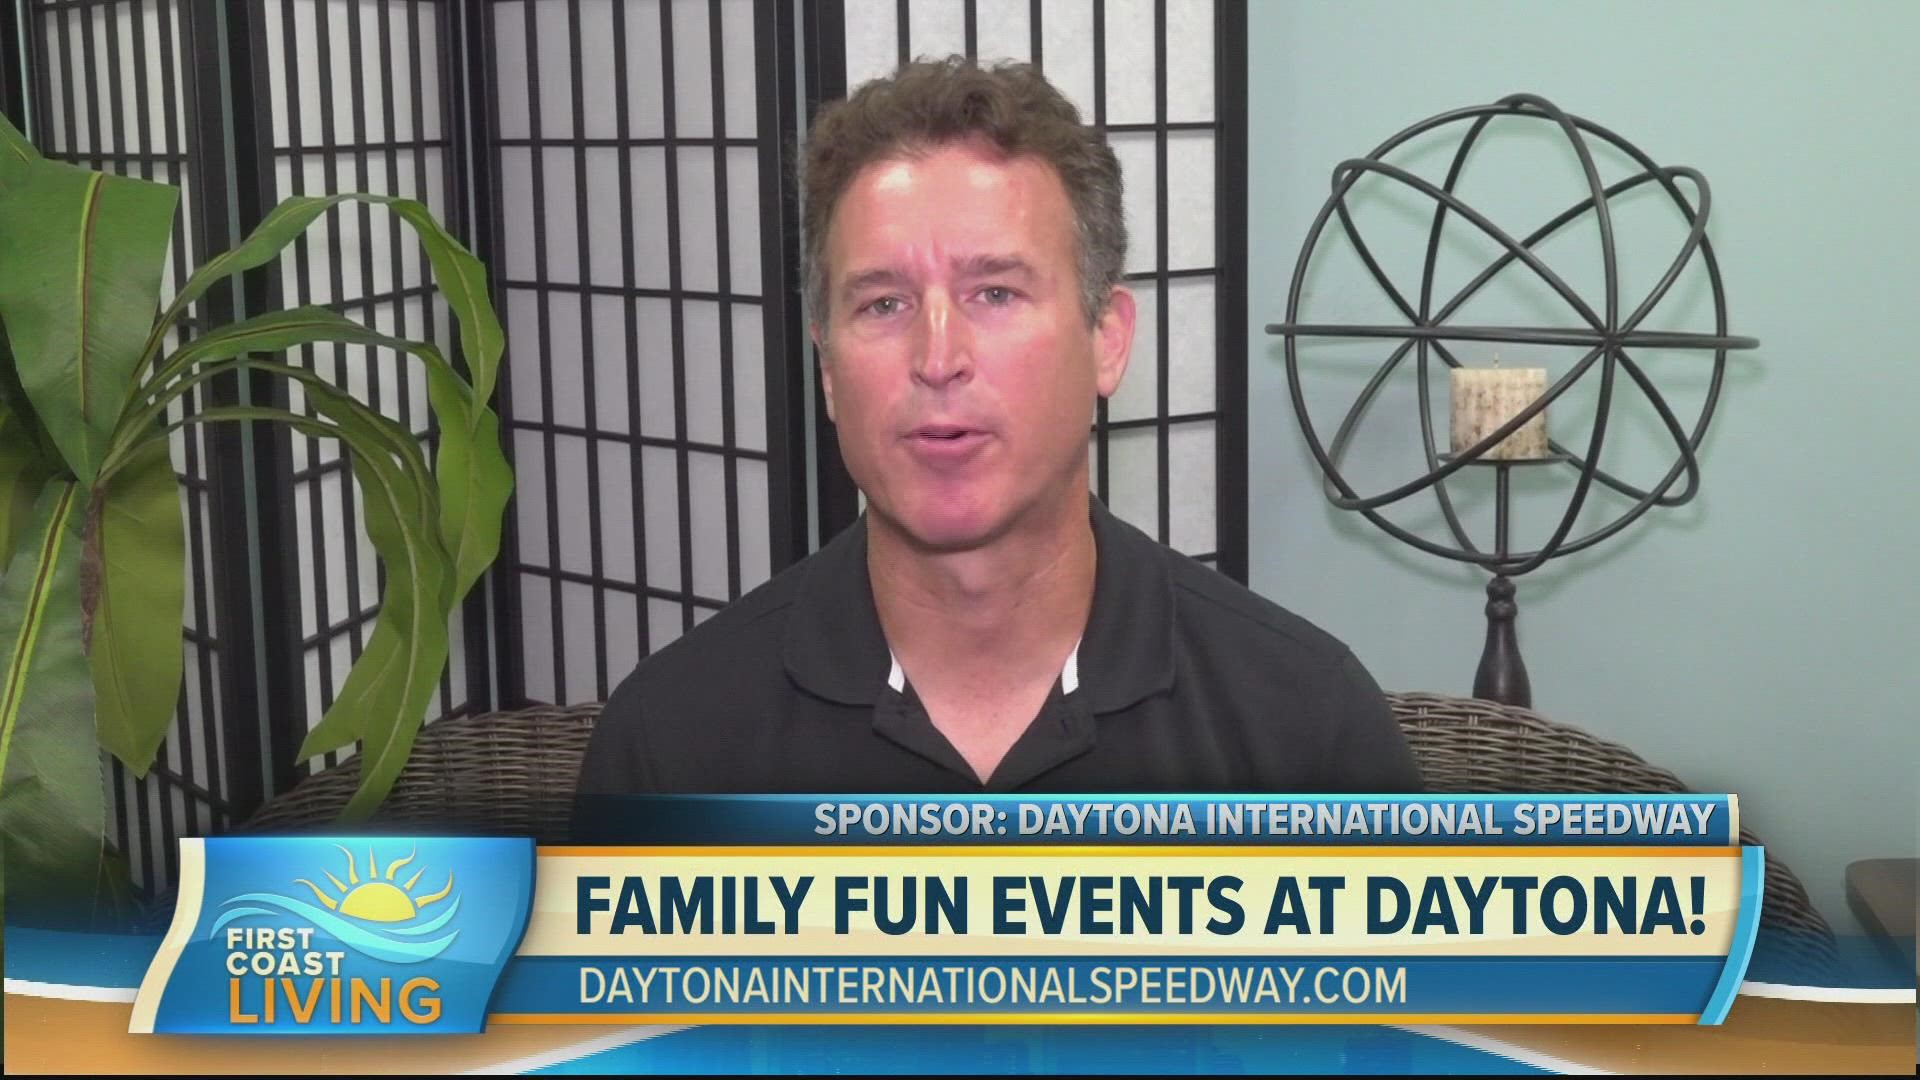 Frank Kelleher, Track President at Daytona International Speedway, gets us excited about all the family friendly events coming up for race weekend.